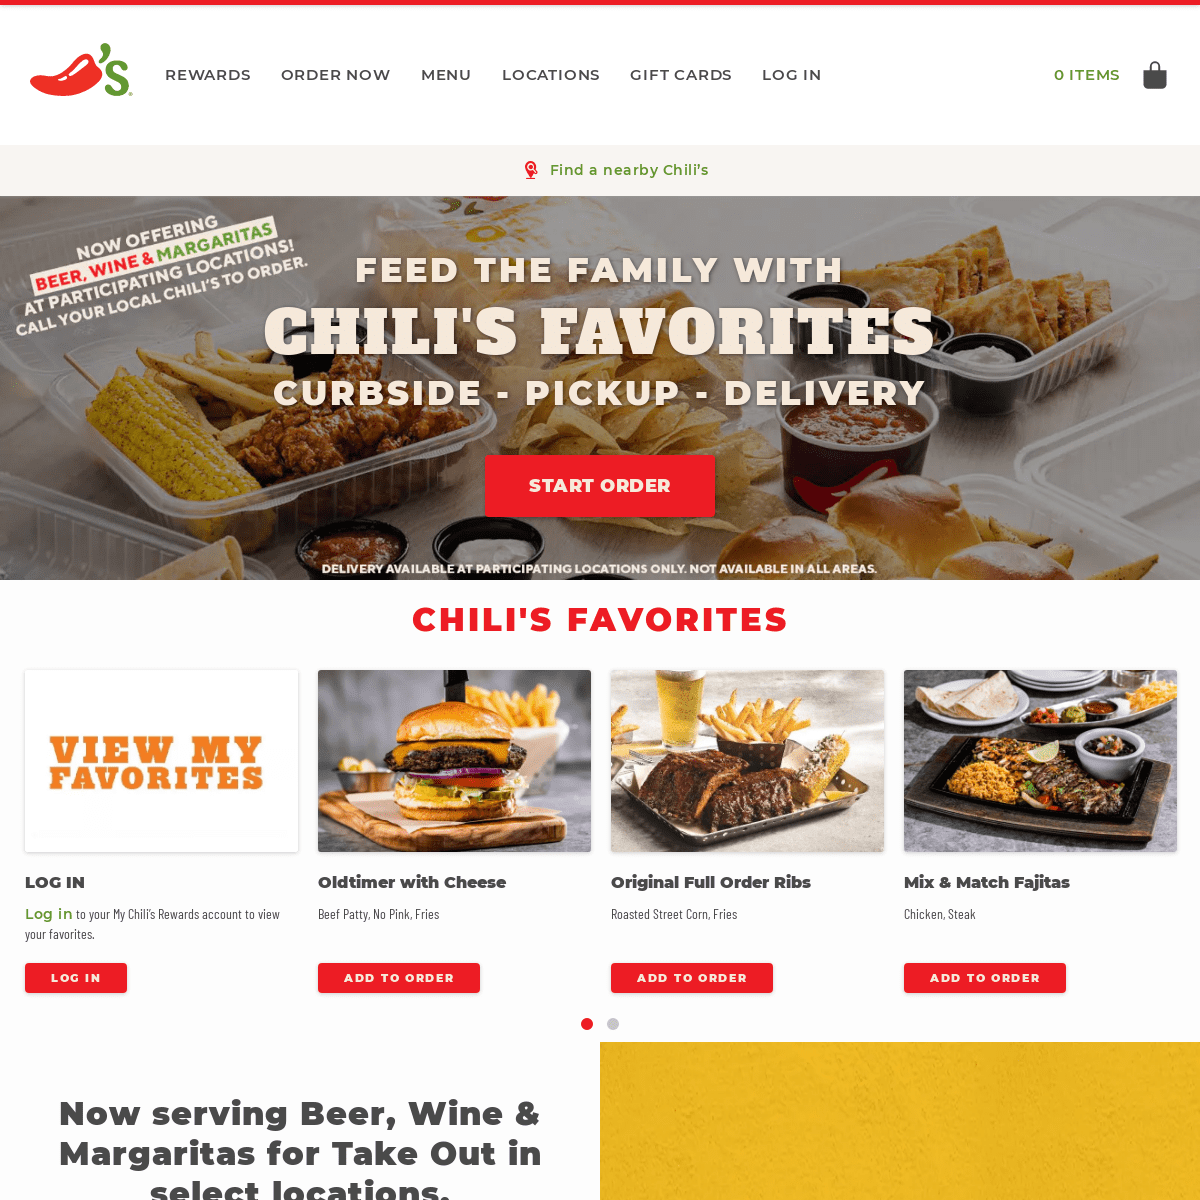 A complete backup of chilis.com